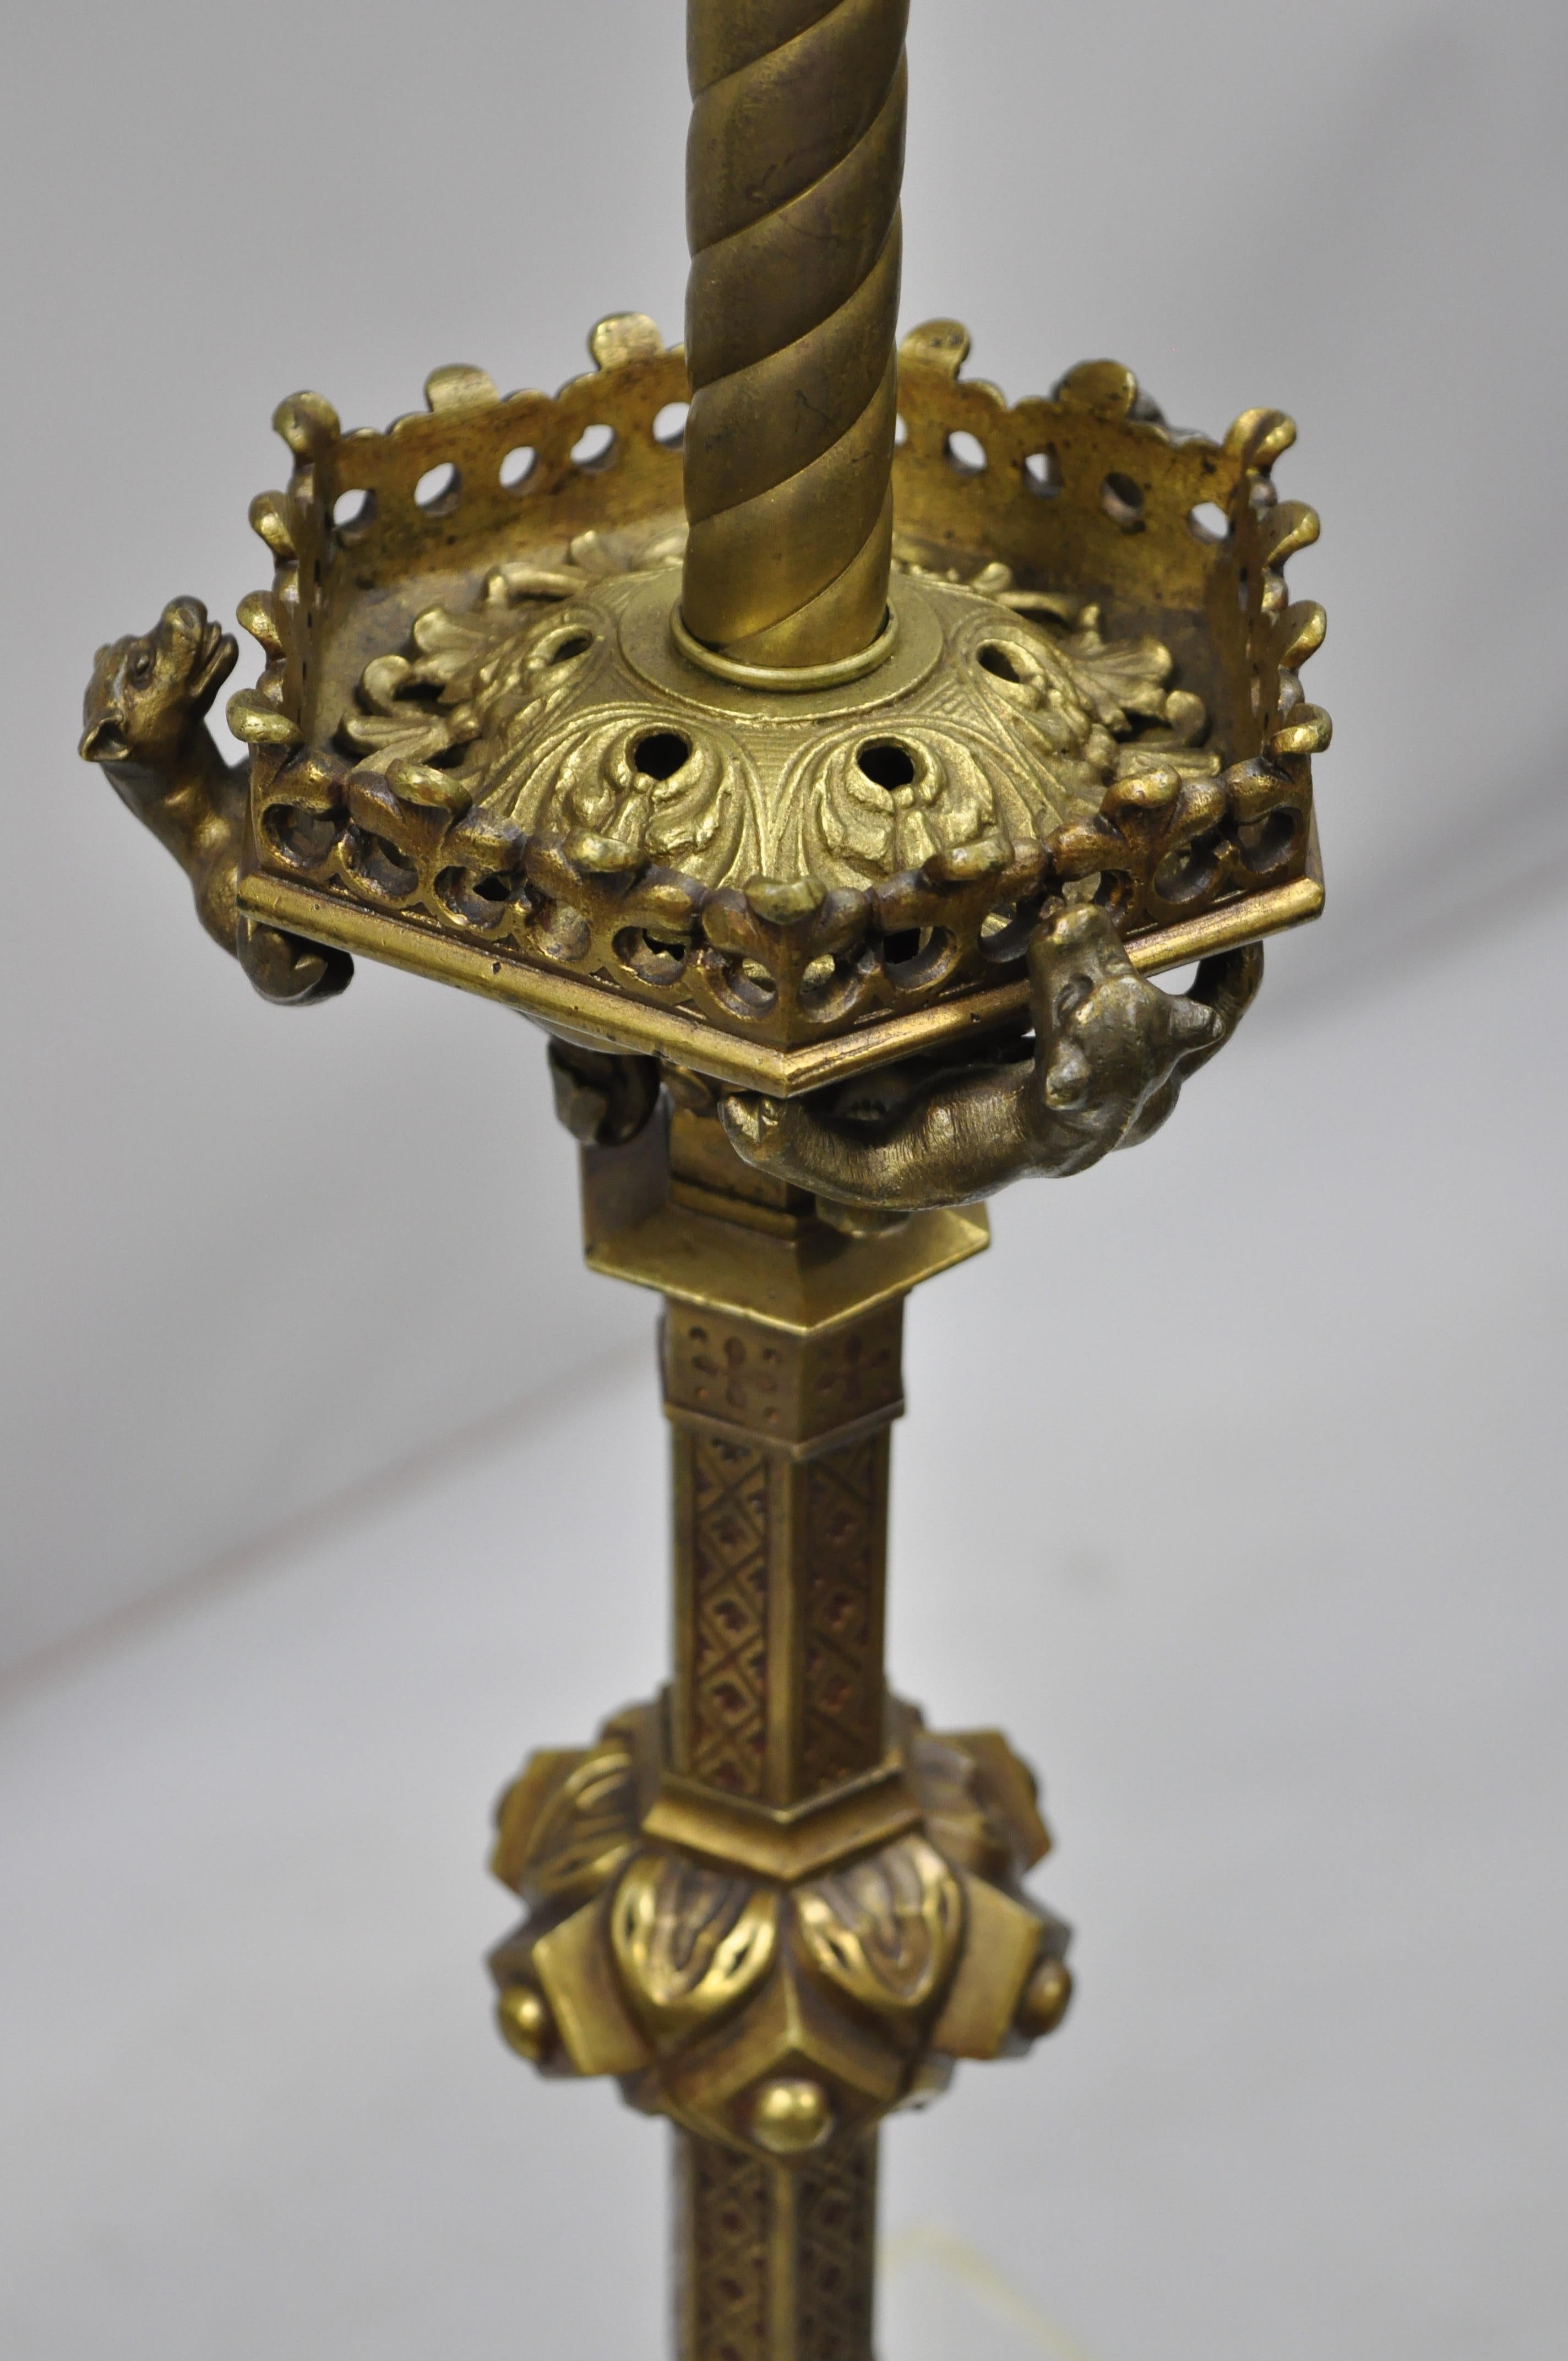 19th century French neoclassical bronze winged griffin candlestick table lamp. Item features winged griffin feet, griffins climbing to the top of the fixture, cast bronze construction, pad feet, very nice antique item, circa 19th century.